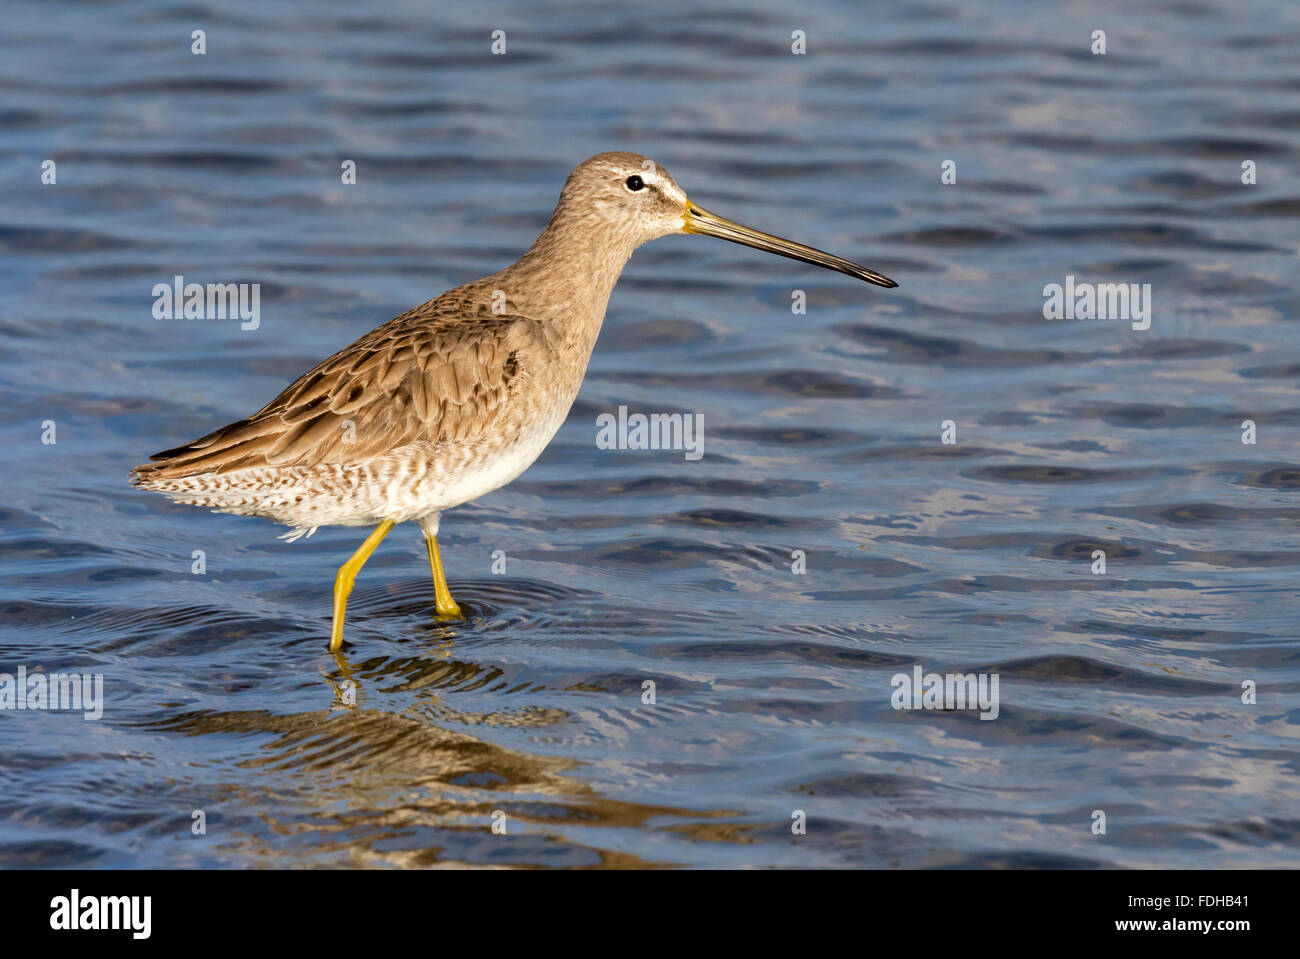 Long-billed dowitcher (Limnodromus scolopaceus) wading in the tidal marsh, Galveston, Texas, USA. Stock Photo